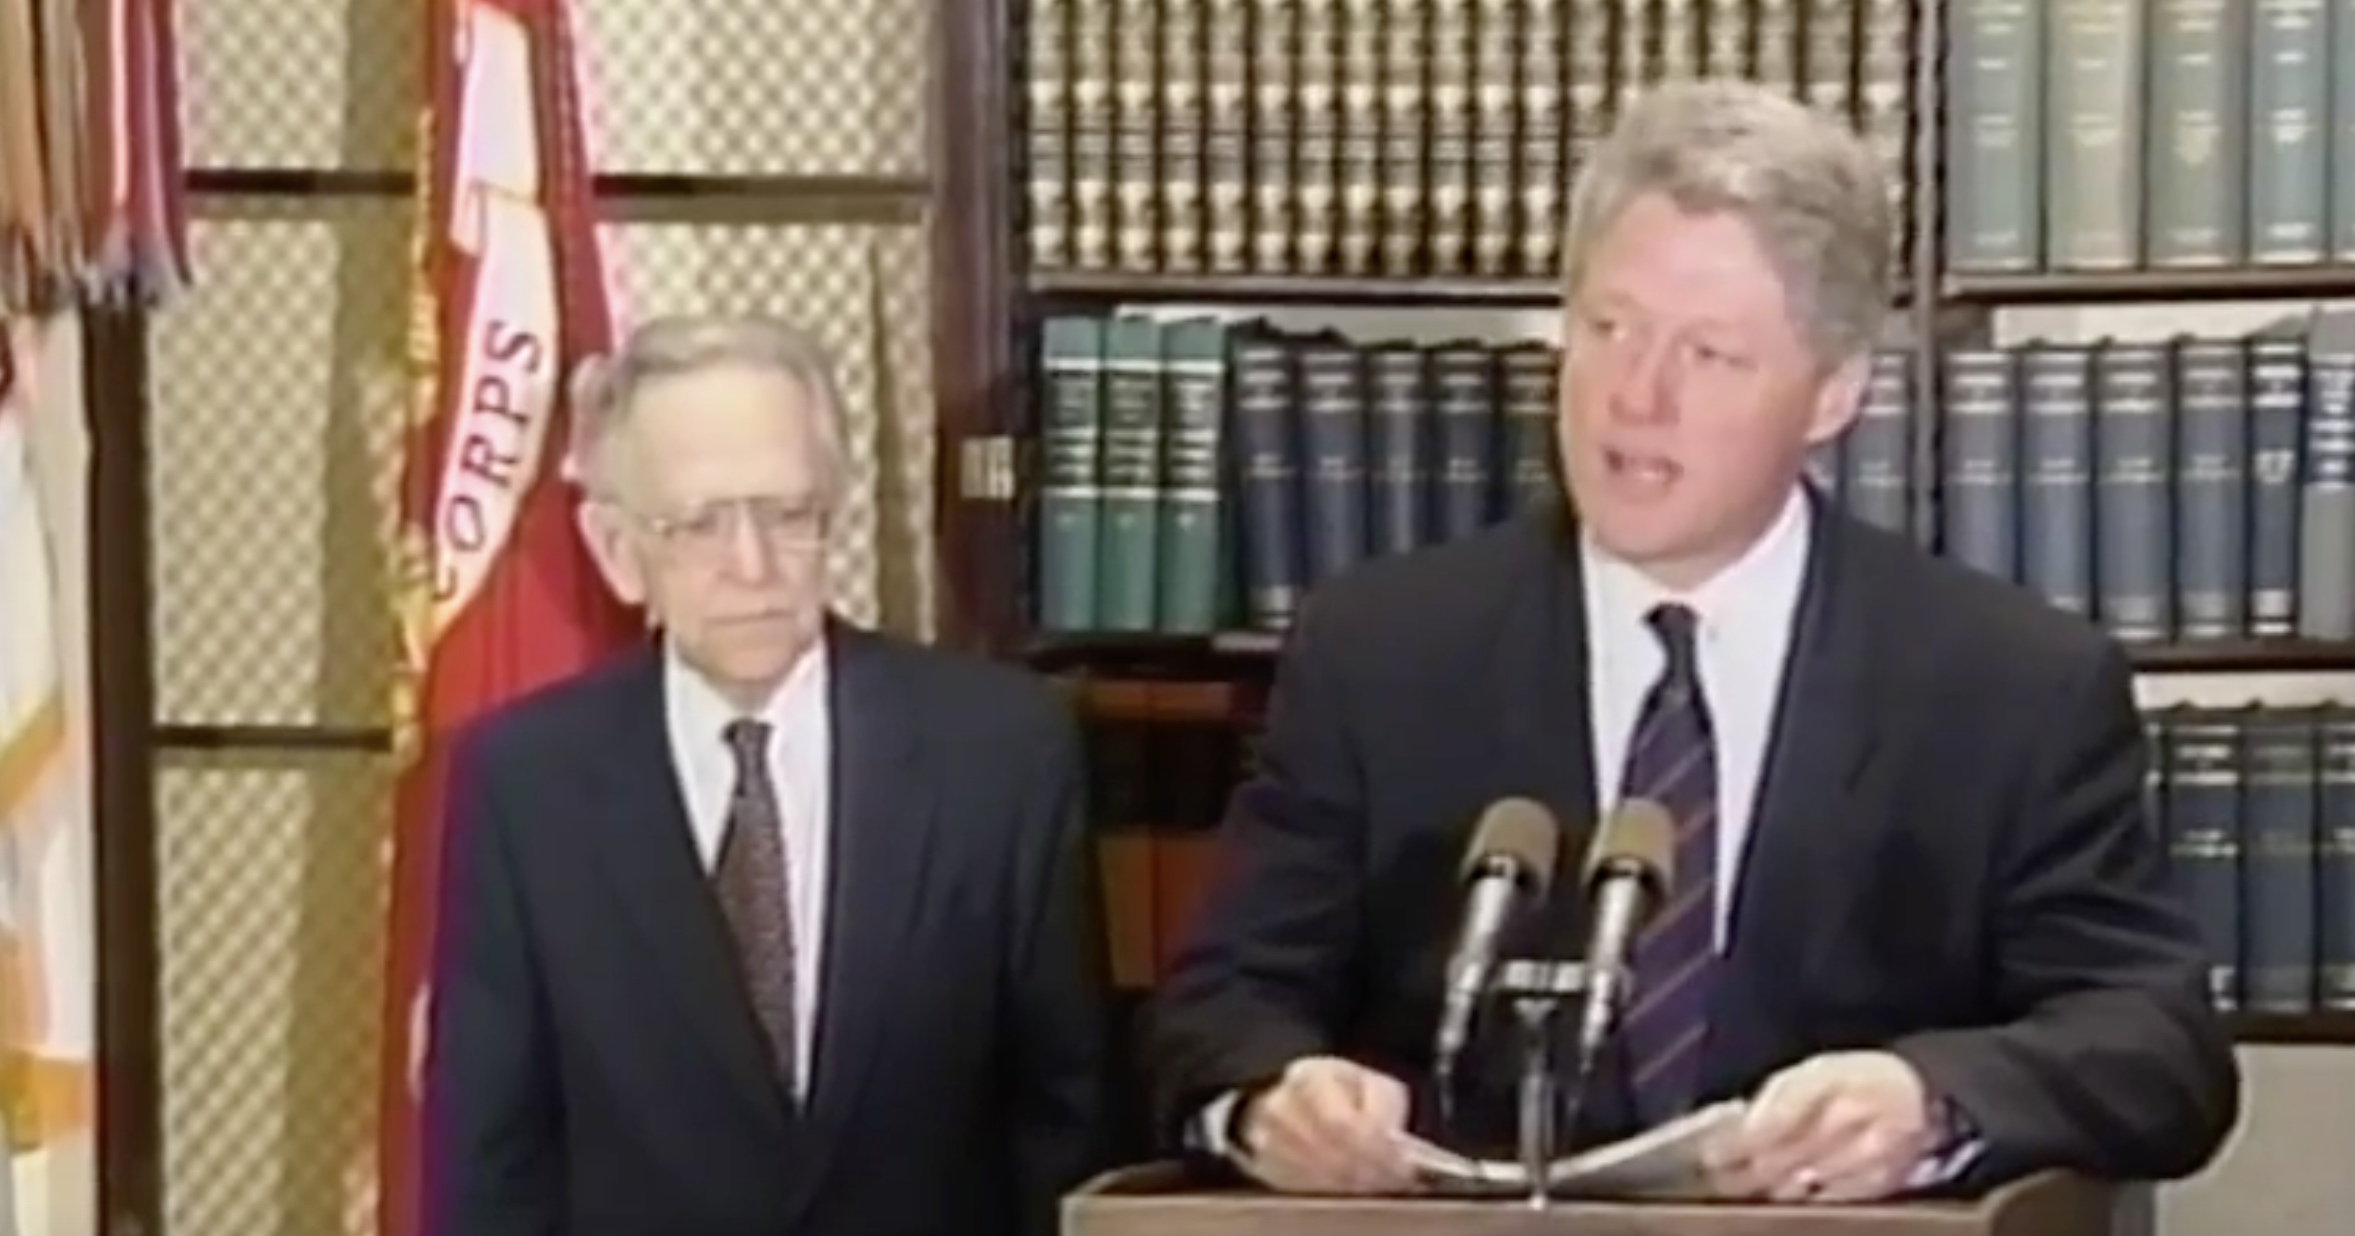 bill clinton speaking at lectern with harry blackmun standing beside him